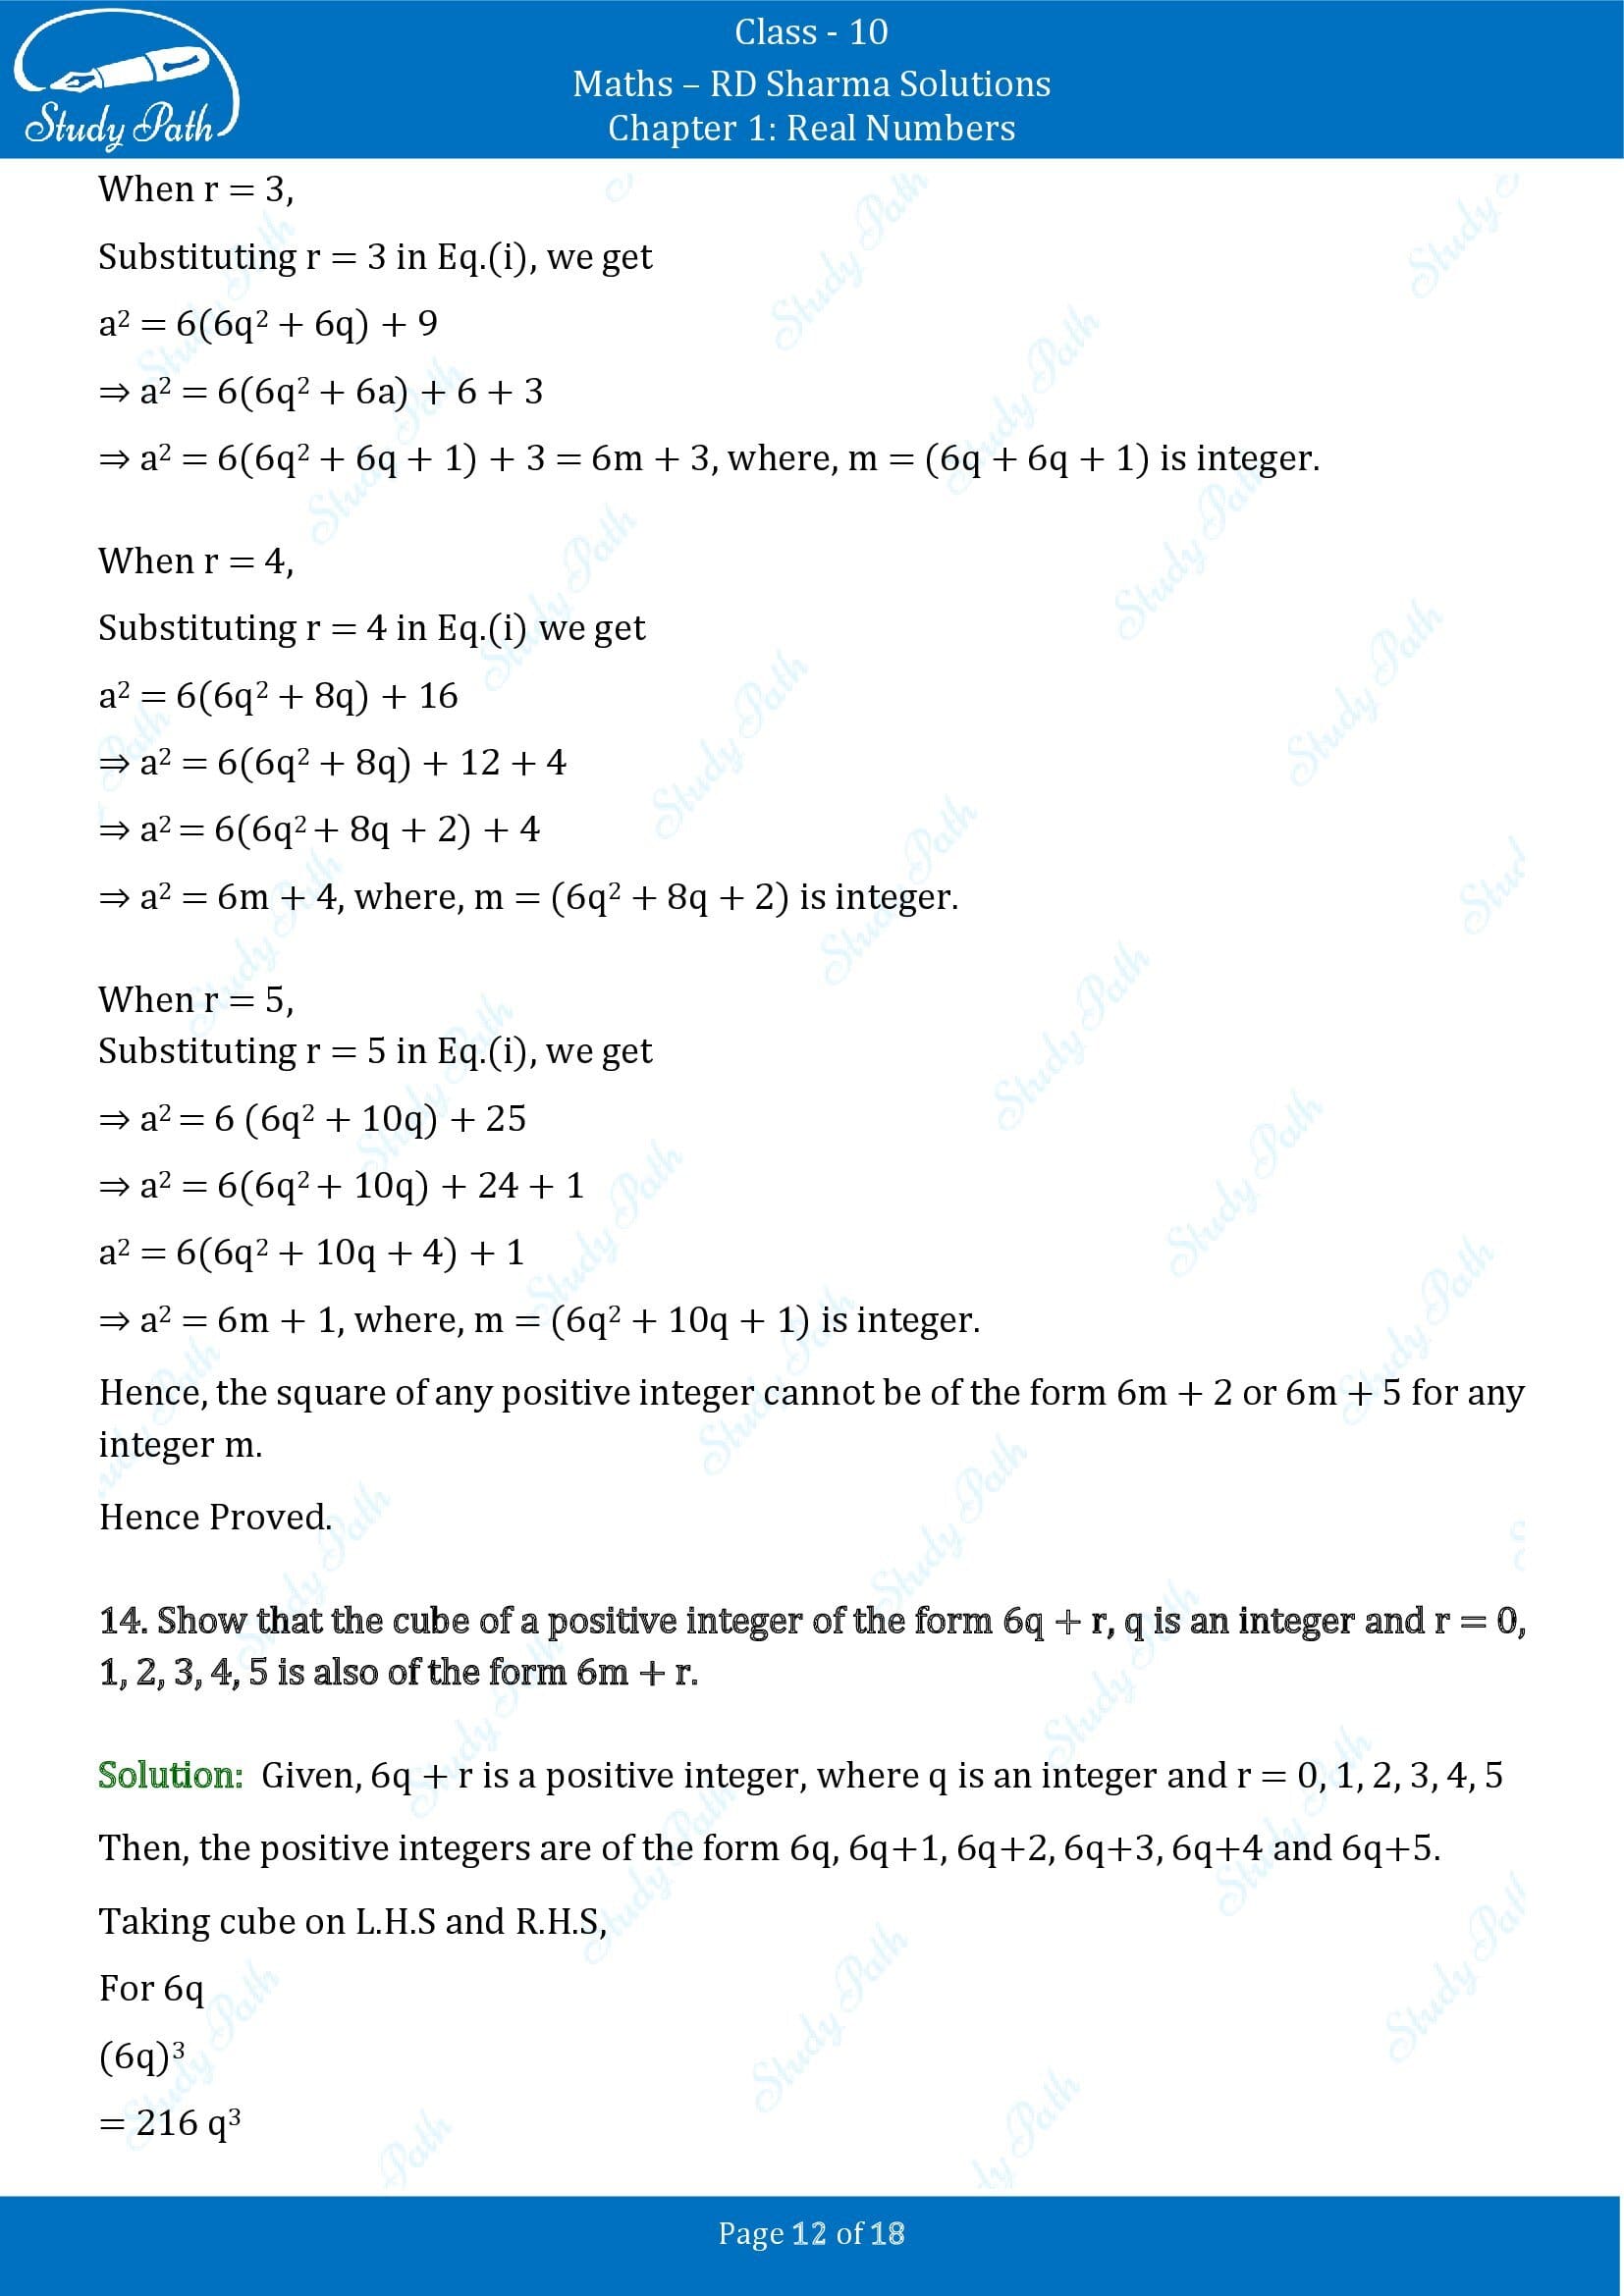 RD Sharma Solutions Class 10 Chapter 1 Real Numbers Exercise 1.1 00012